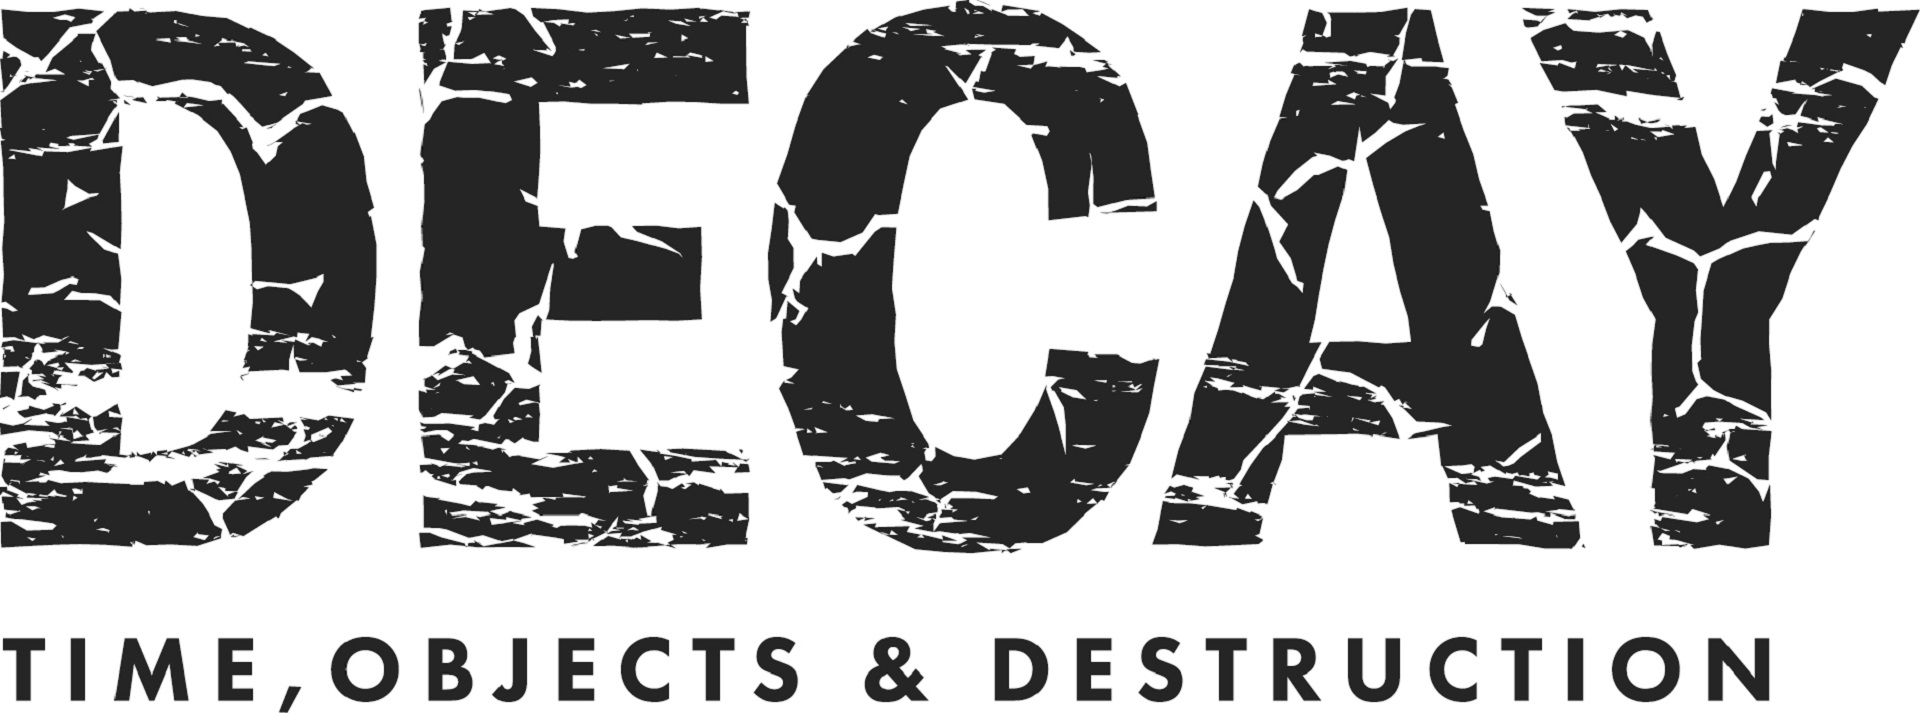 Title graphic for the Decay exhibition.